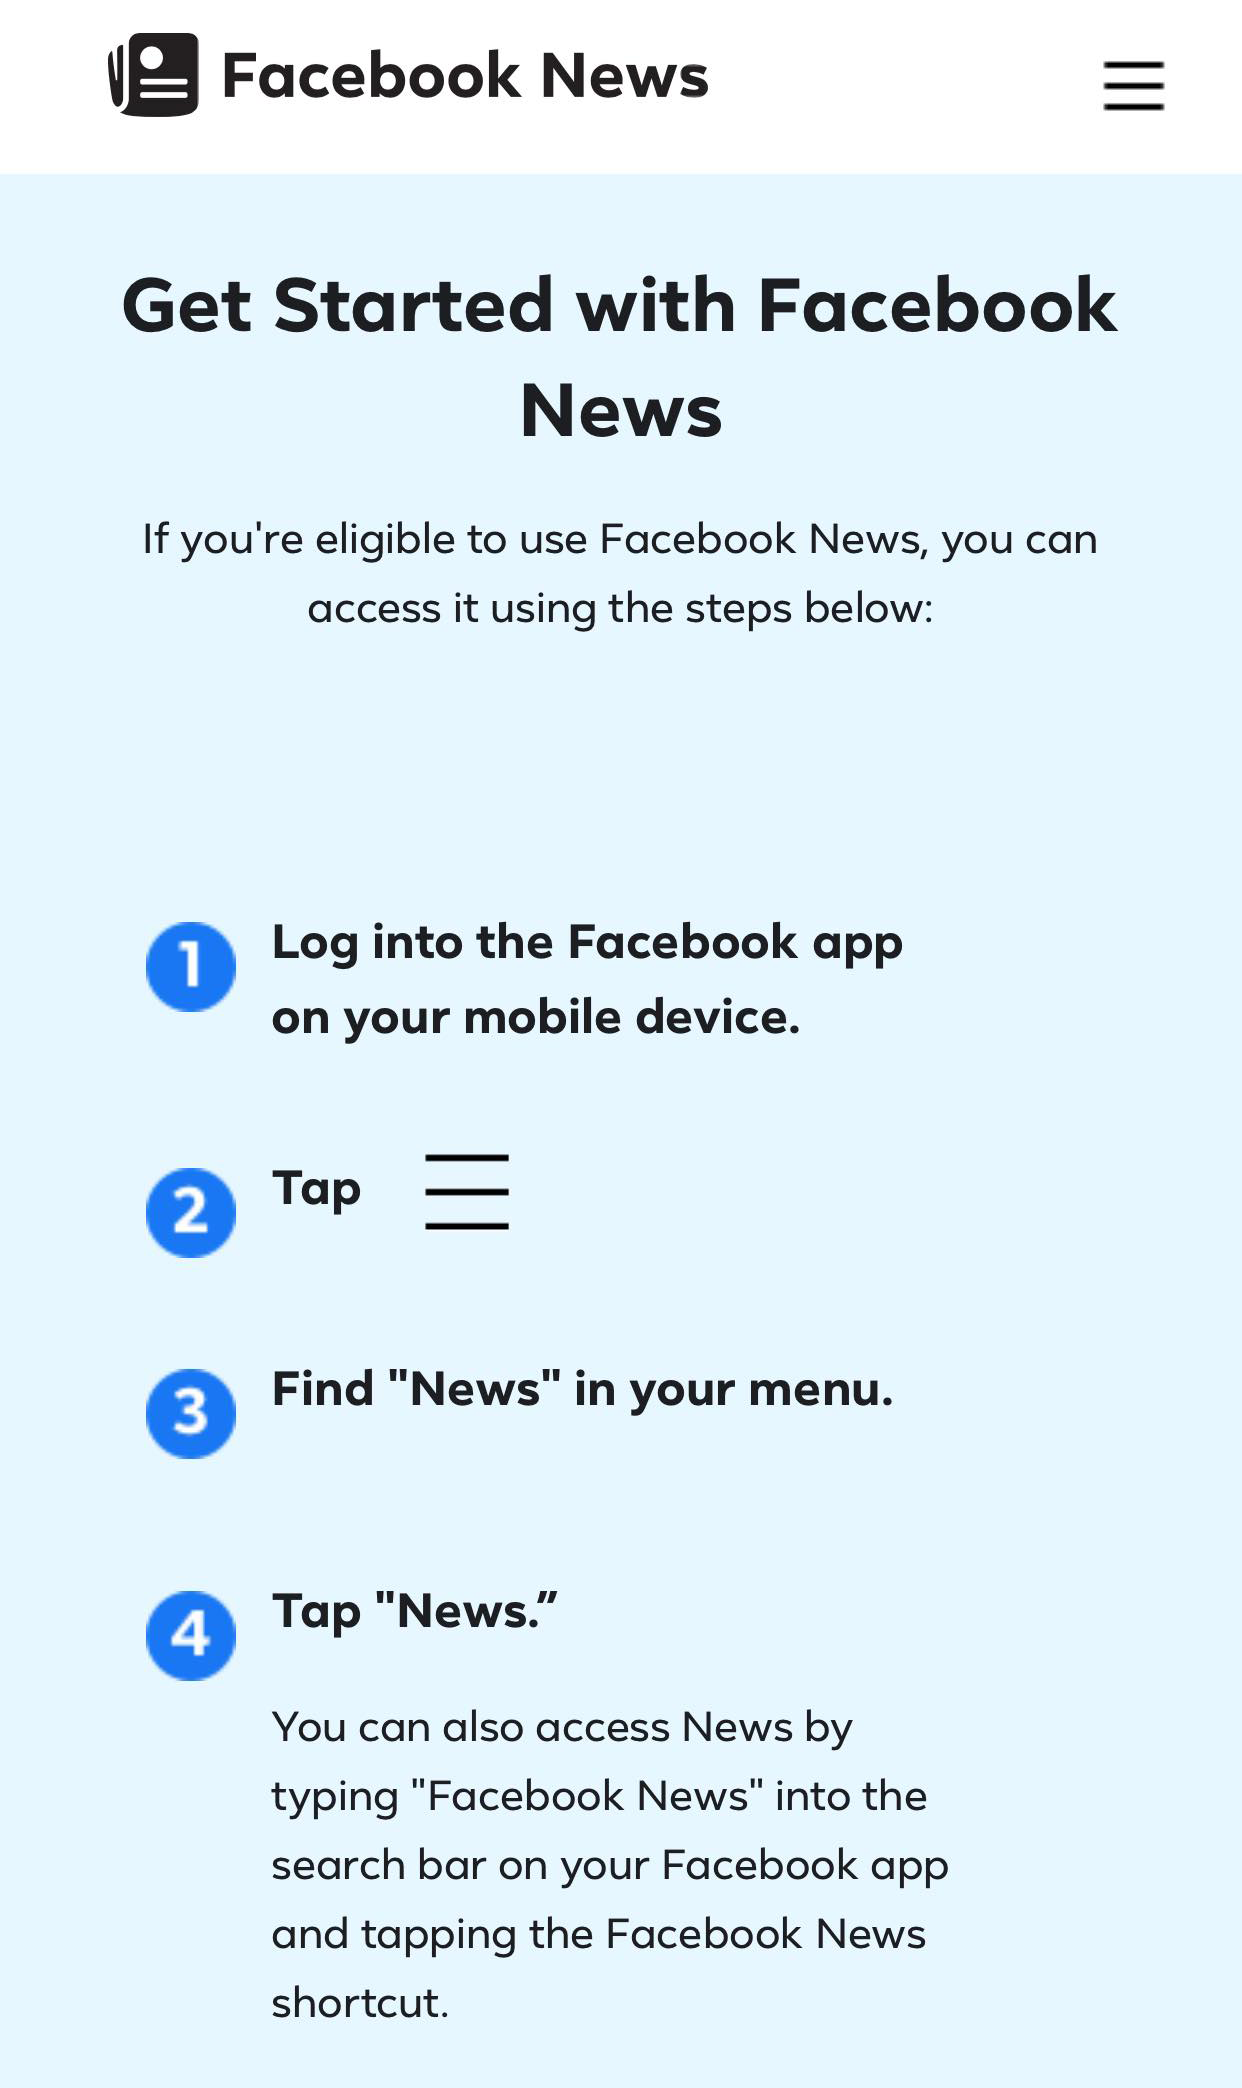 A screenshot of the Facebook News "Get started" page